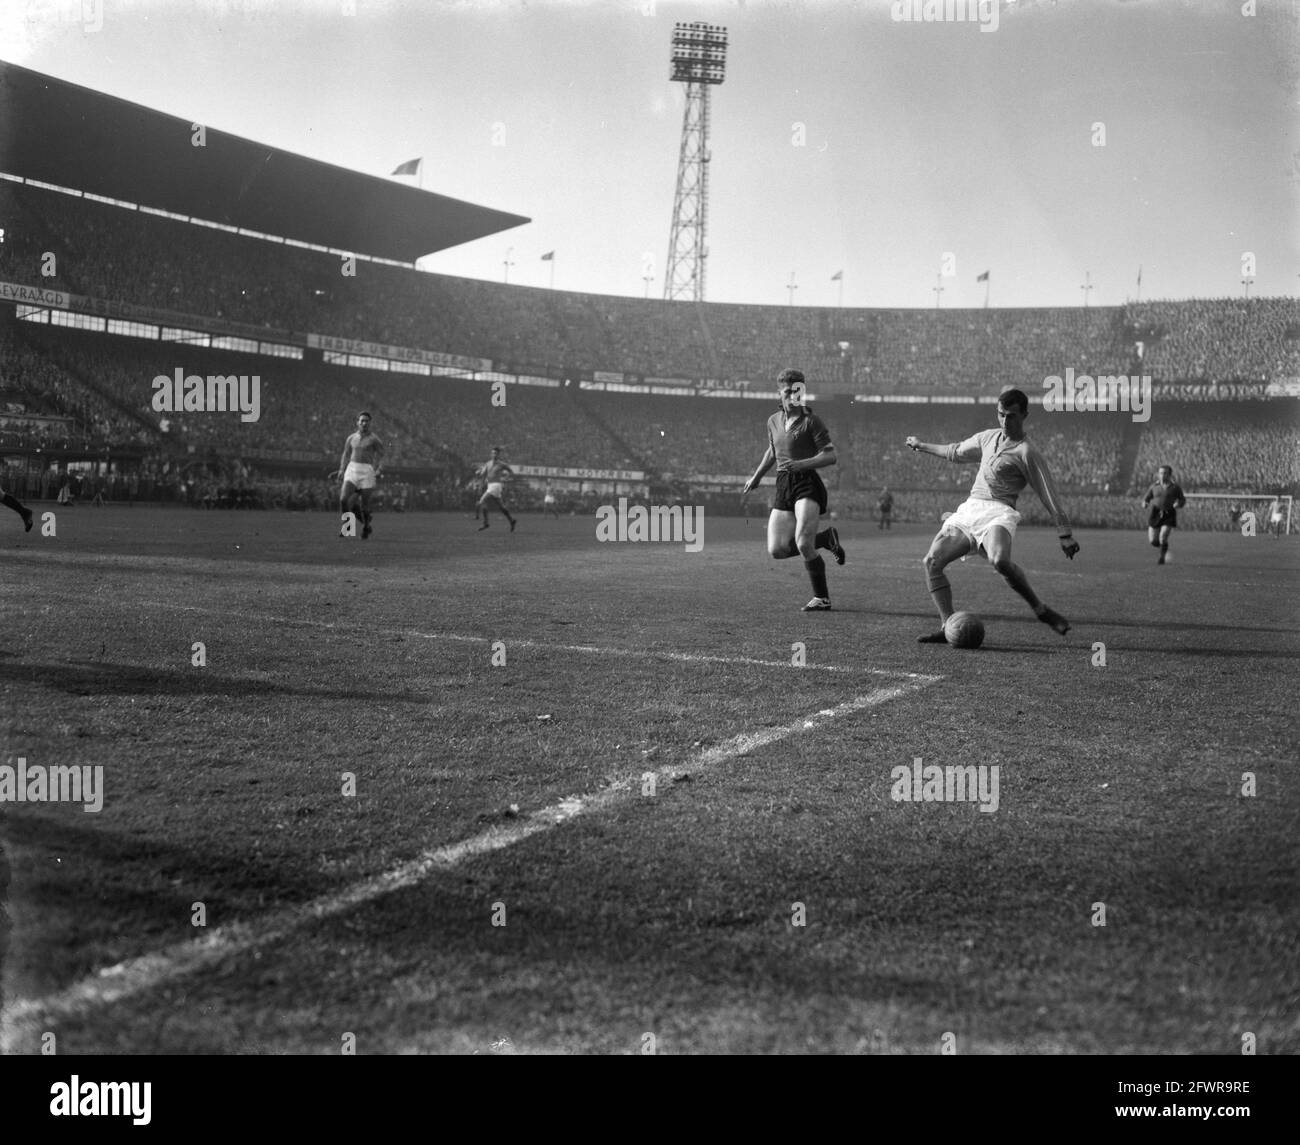 Netherlands v Belgium 9-1. Coen Moulijn in action, October 4, 1959, sports, soccer, The Netherlands, 20th century press agency photo, news to remember, documentary, historic photography 1945-1990, visual stories, human history of the Twentieth Century, capturing moments in time Stock Photo